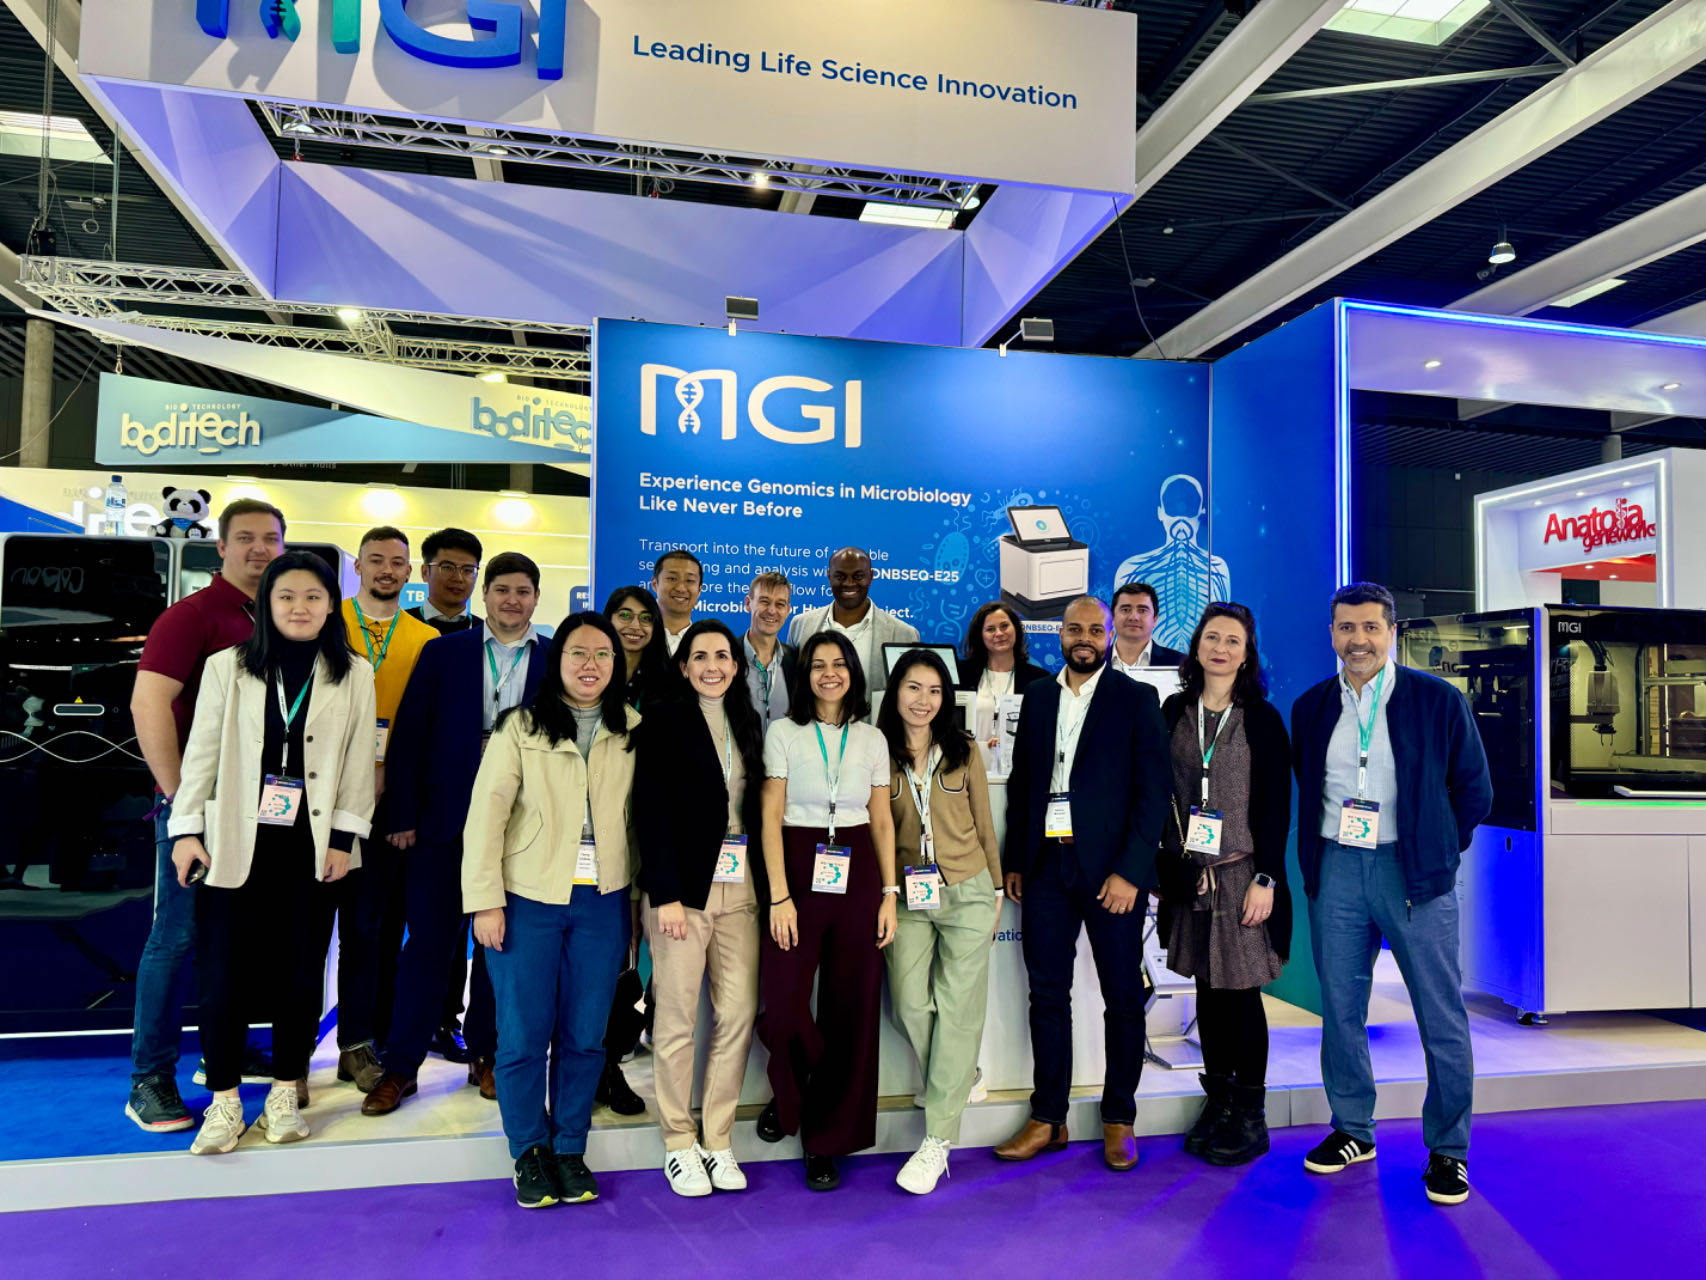 MGI Showcases Life Science Excellence at ESCMID Global 2024 with Latest DNBSEQ-E25 Sequencer and New Partnership with ABL Diagnostics